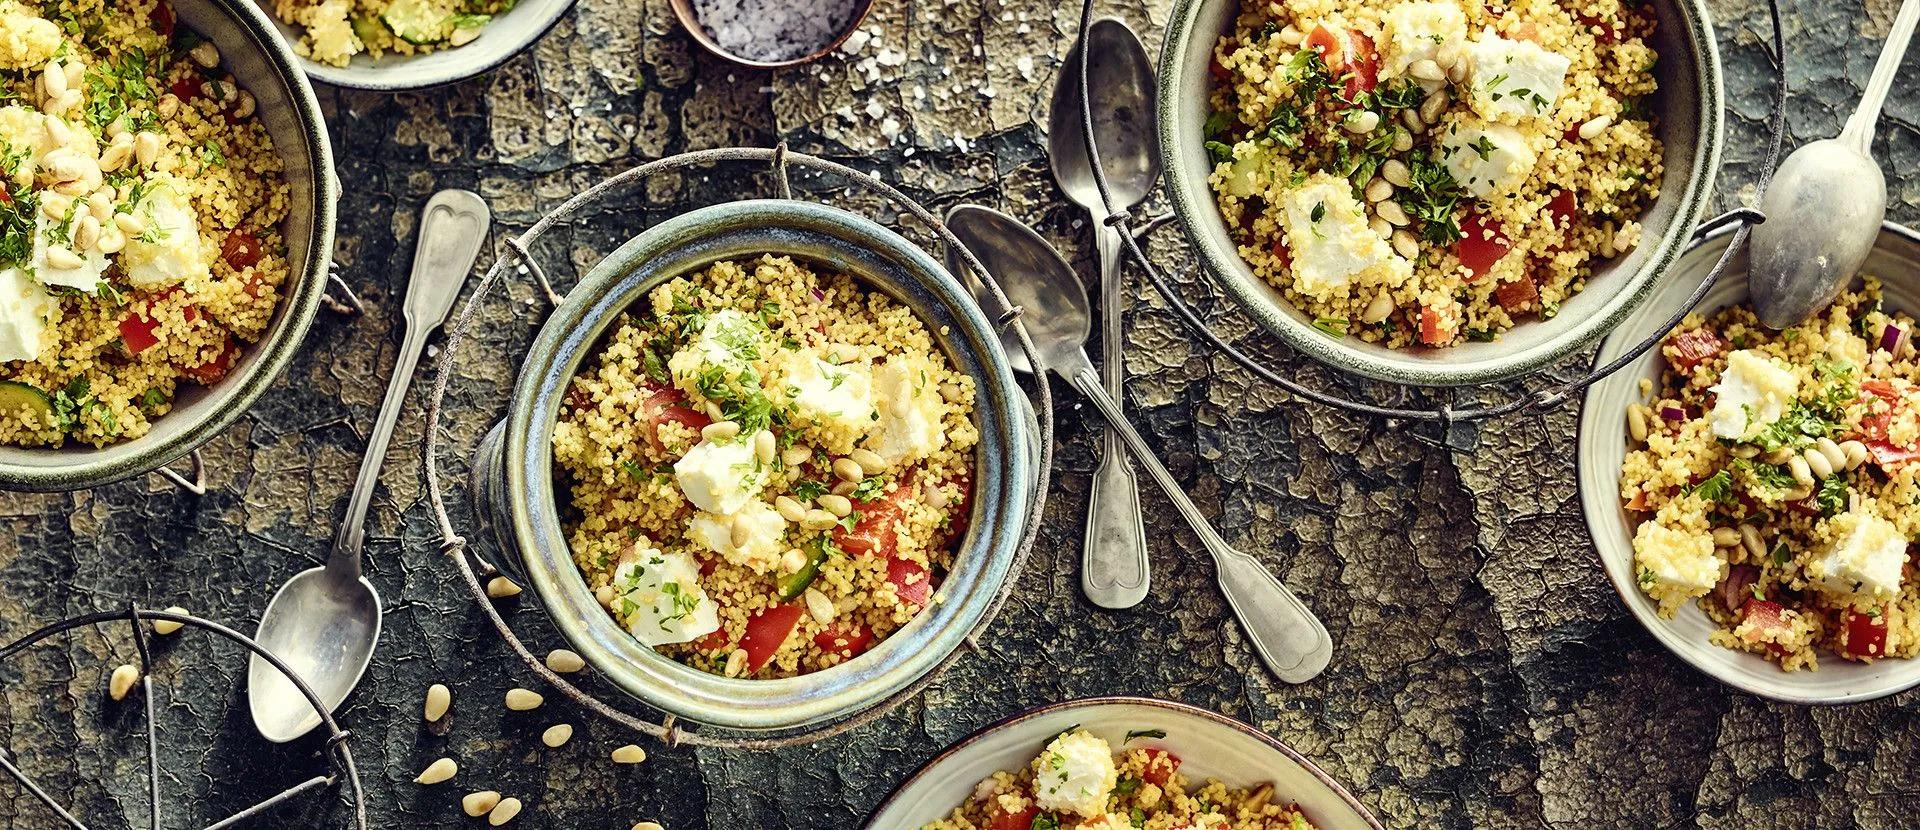 Couscous Salat, Ethnic Recipes, Food, Salad With Feta Cheese, Cilantro ...